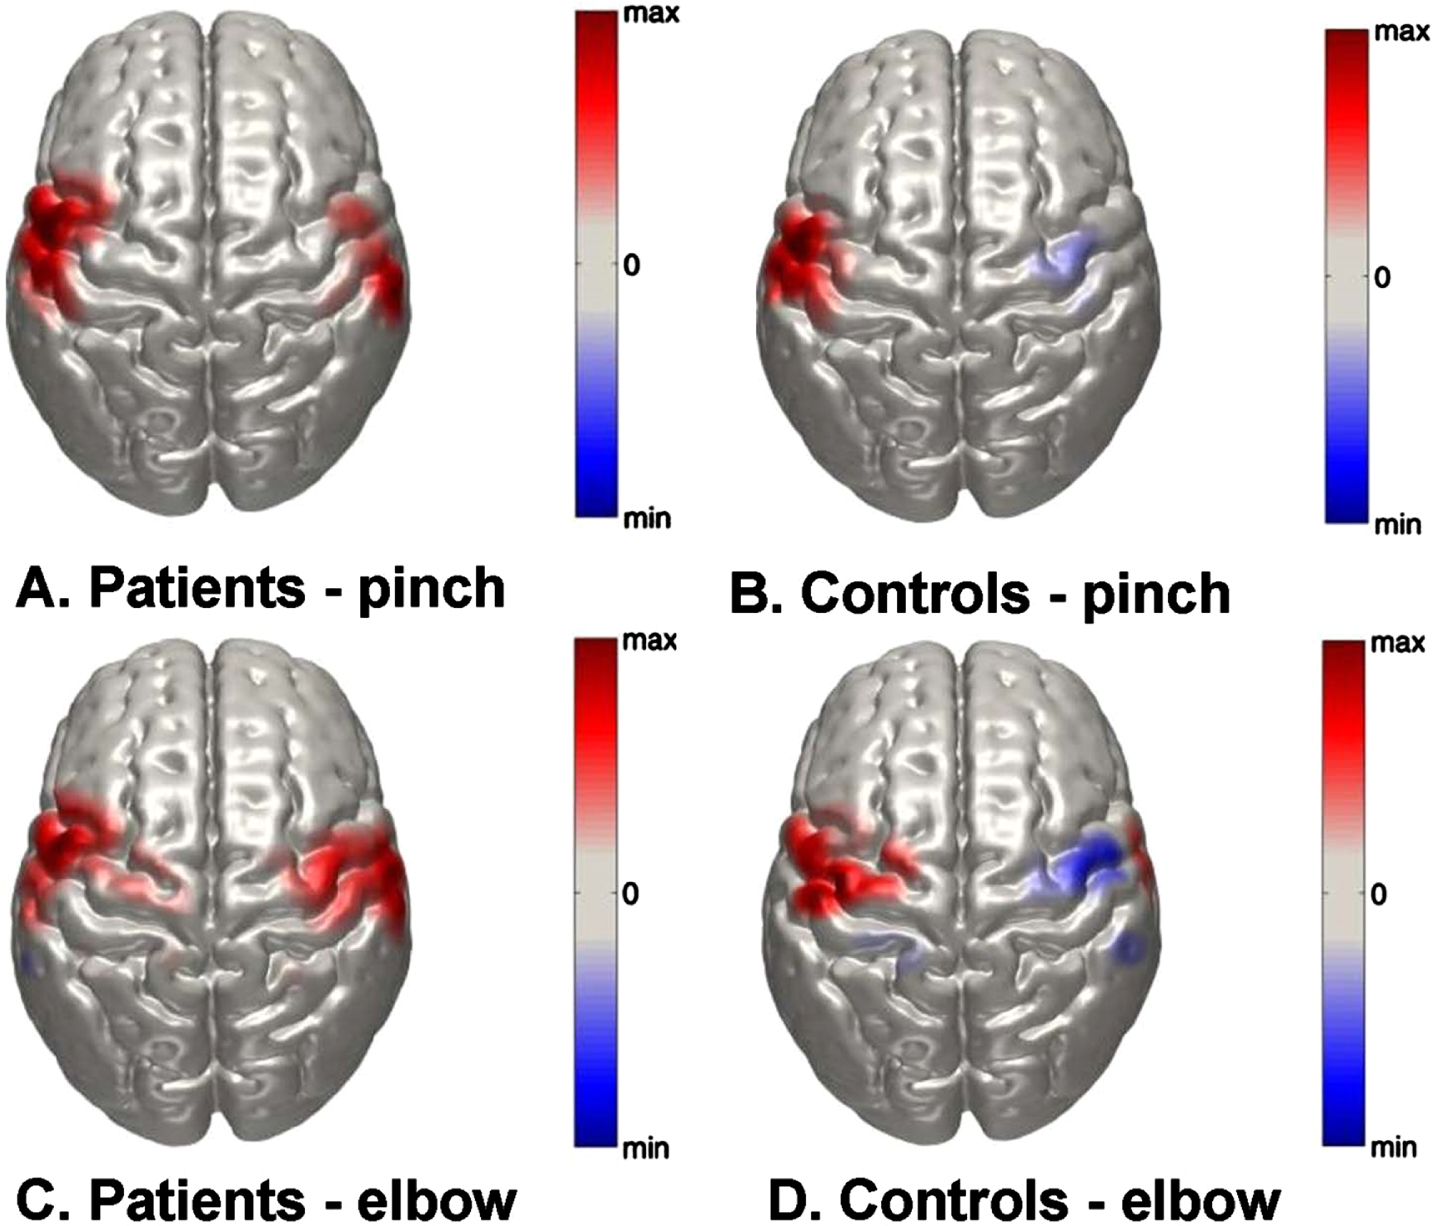 Normalized group-level DOT images of oxy-Hb responses in the right and left hemispheres in response to right sided A) key pinch task in patients; B) elbow-flexion task in patients; C) key pinch task in control subjects and D) elbow-flexion task in control subjects. Scale is arbitrary.